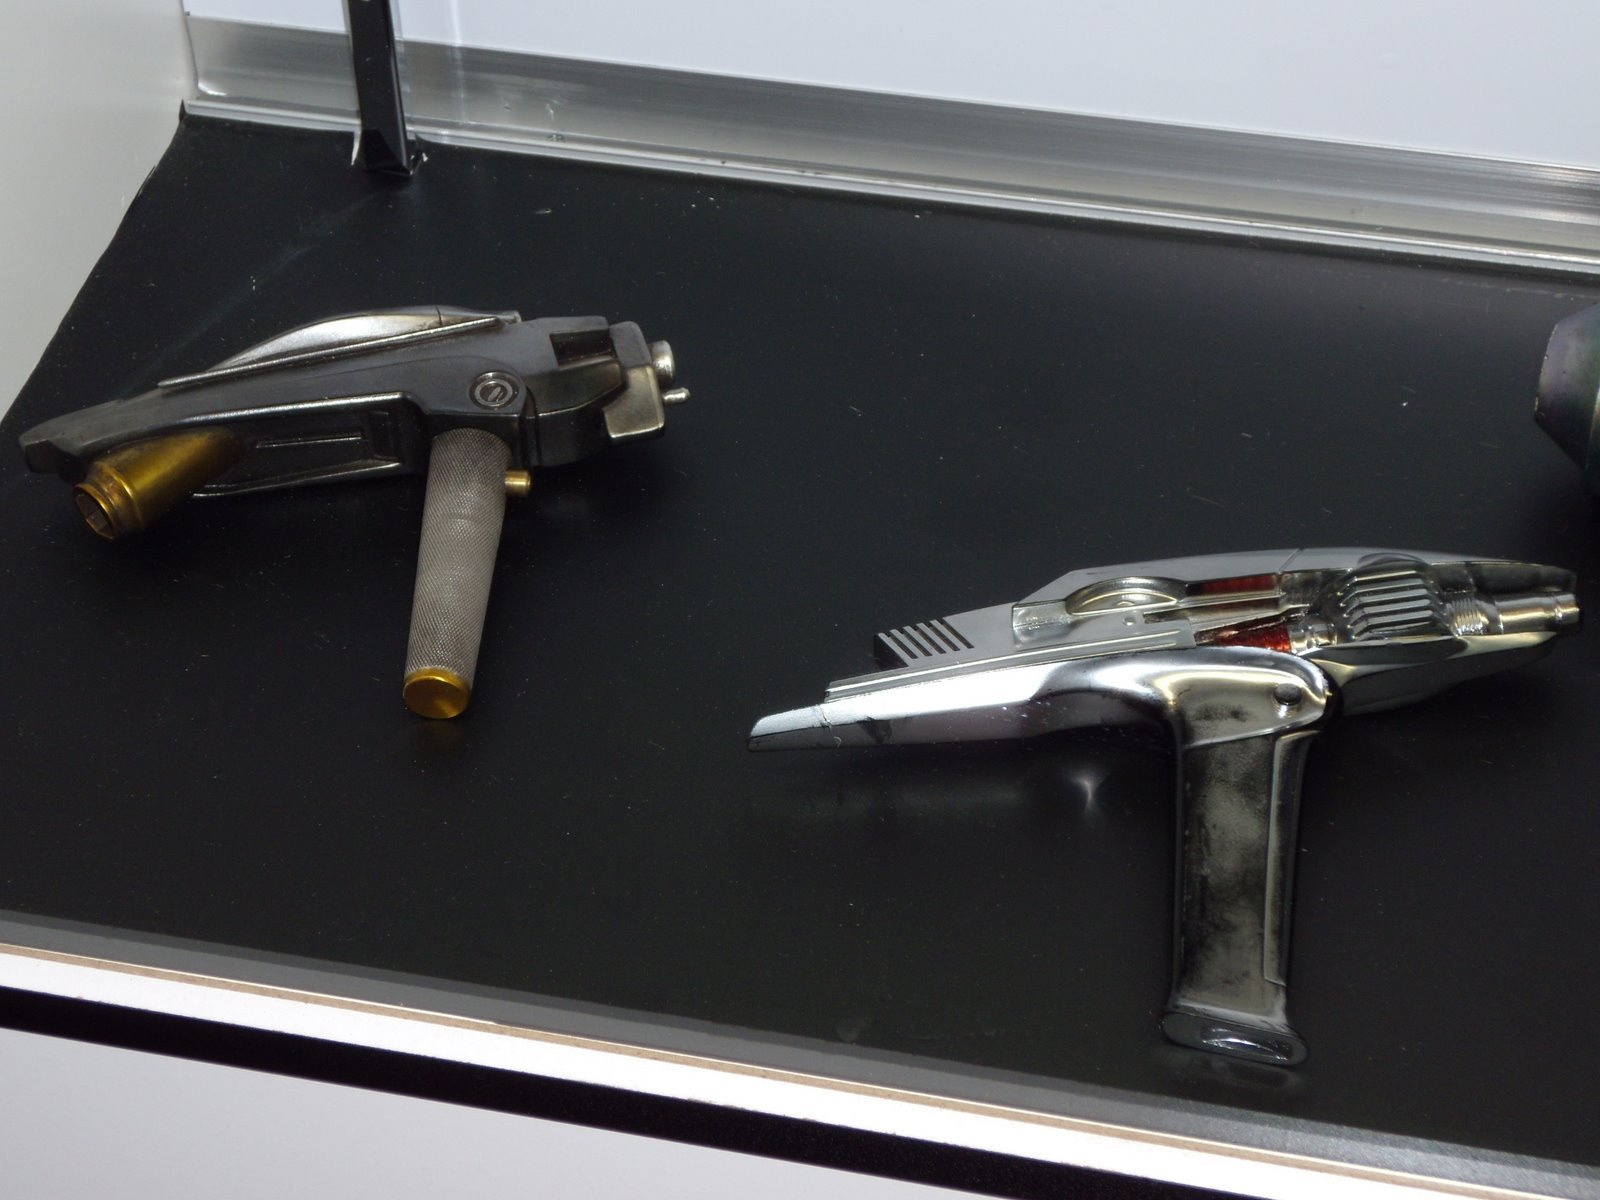 Original movie props from the new Star Trek movie - weapons and communicators